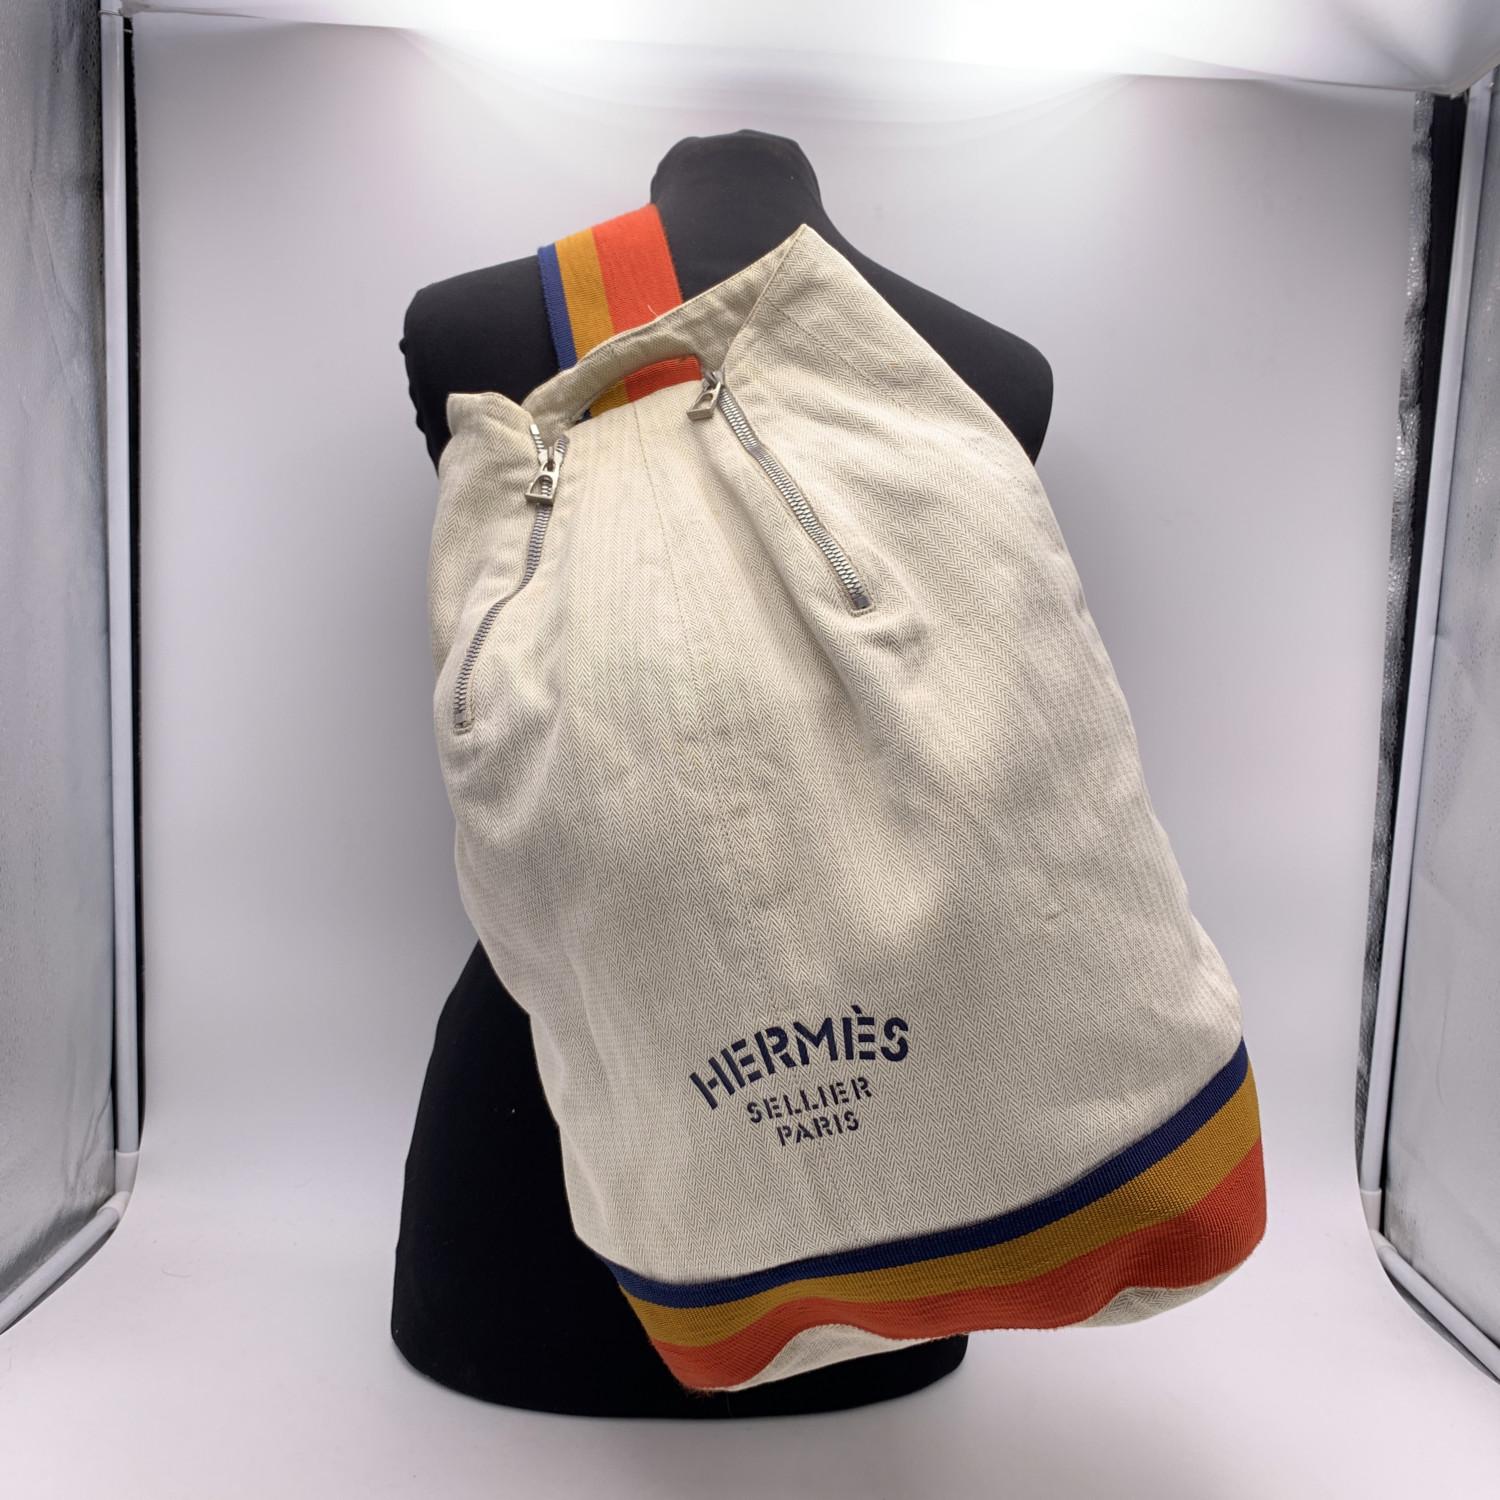 Hermes Sellier Vintage beige cotton canvas Summer beach bag. Multicolored trim and strap. 'Hermes Sellier Paris' printed on the front. 2 zip on top. 'Hermes Paris - Made in France' tag inside.

Details

MATERIAL: Cotton

COLOR: Beige

MODEL: